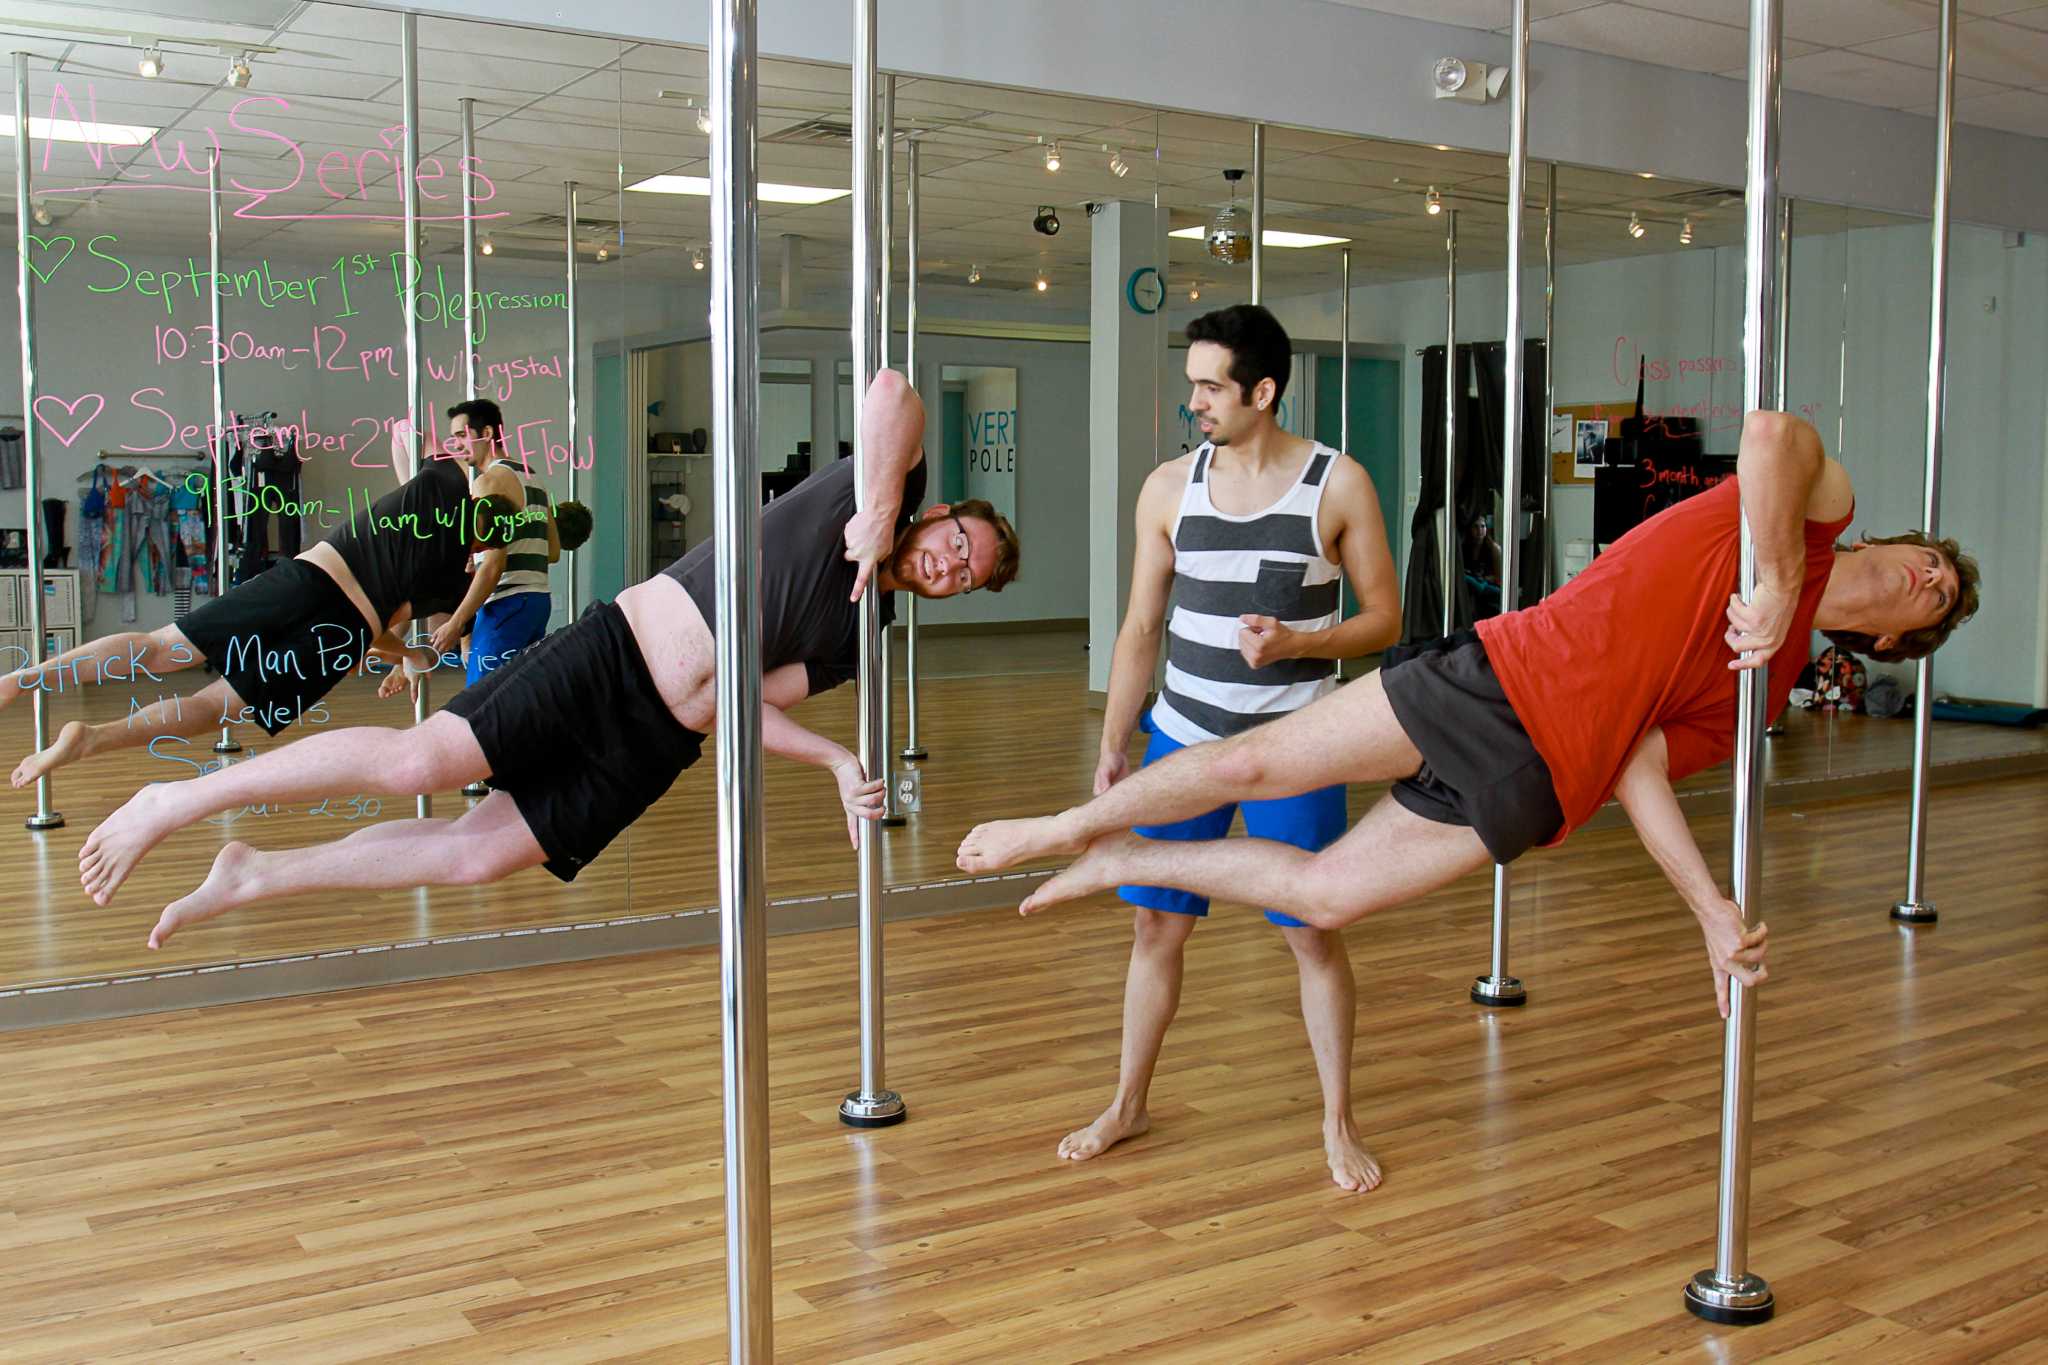 Is it weird: For a guy to pole dance for exercise?